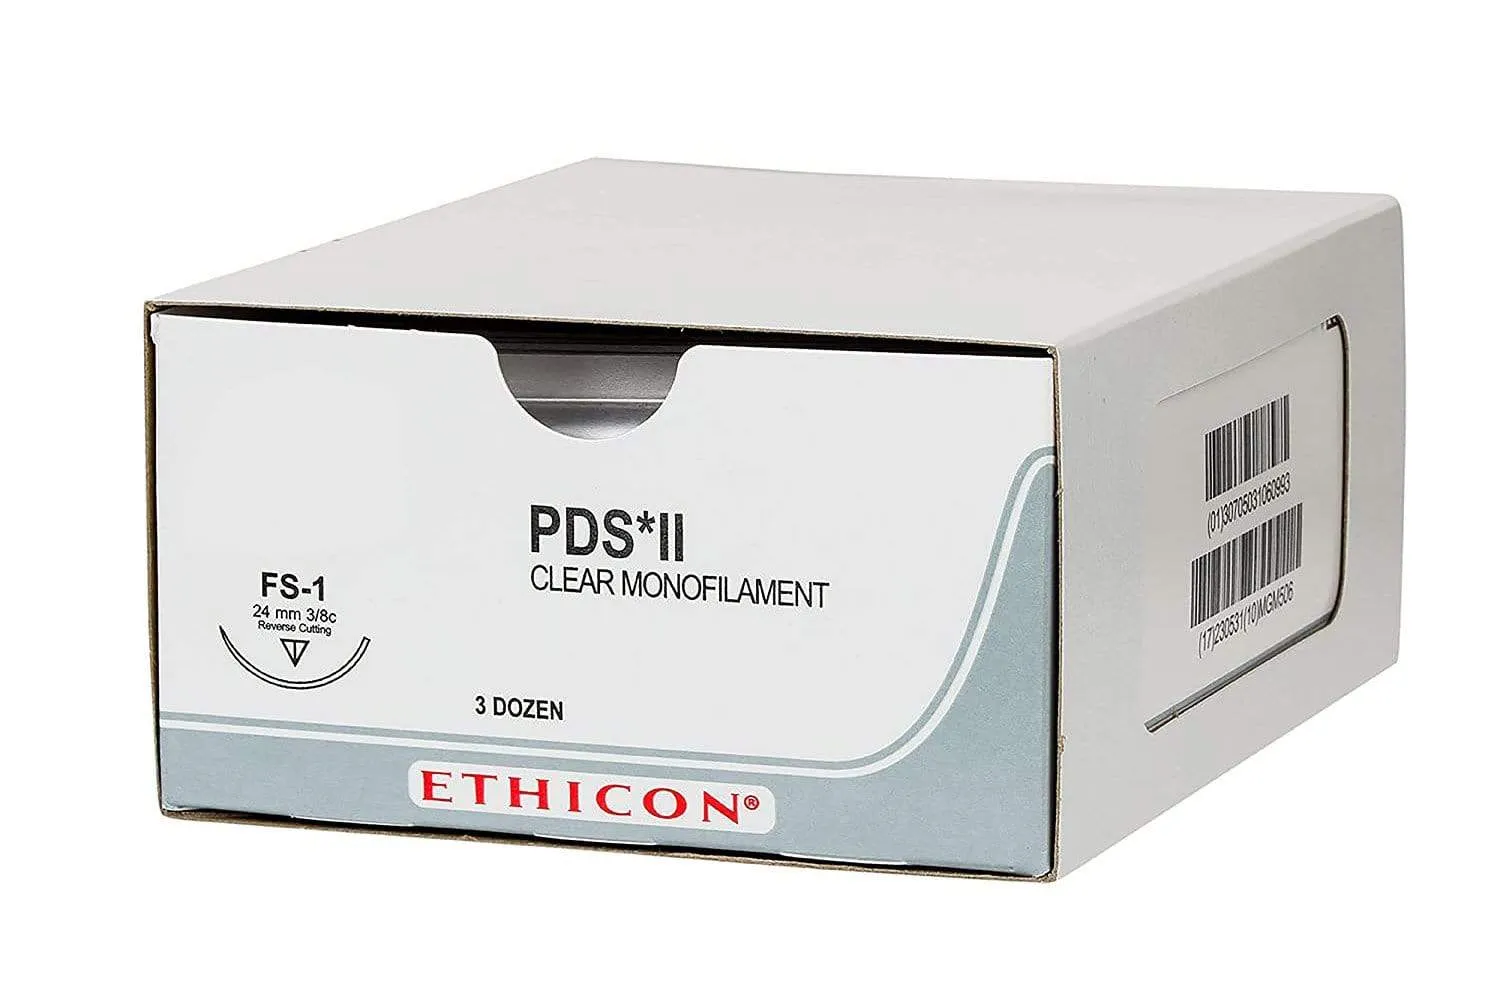 Ethicon PDS II Sutures USP 6-0, 3/8 Circle Round Body BV Double Needle - W9093T -12 Foils